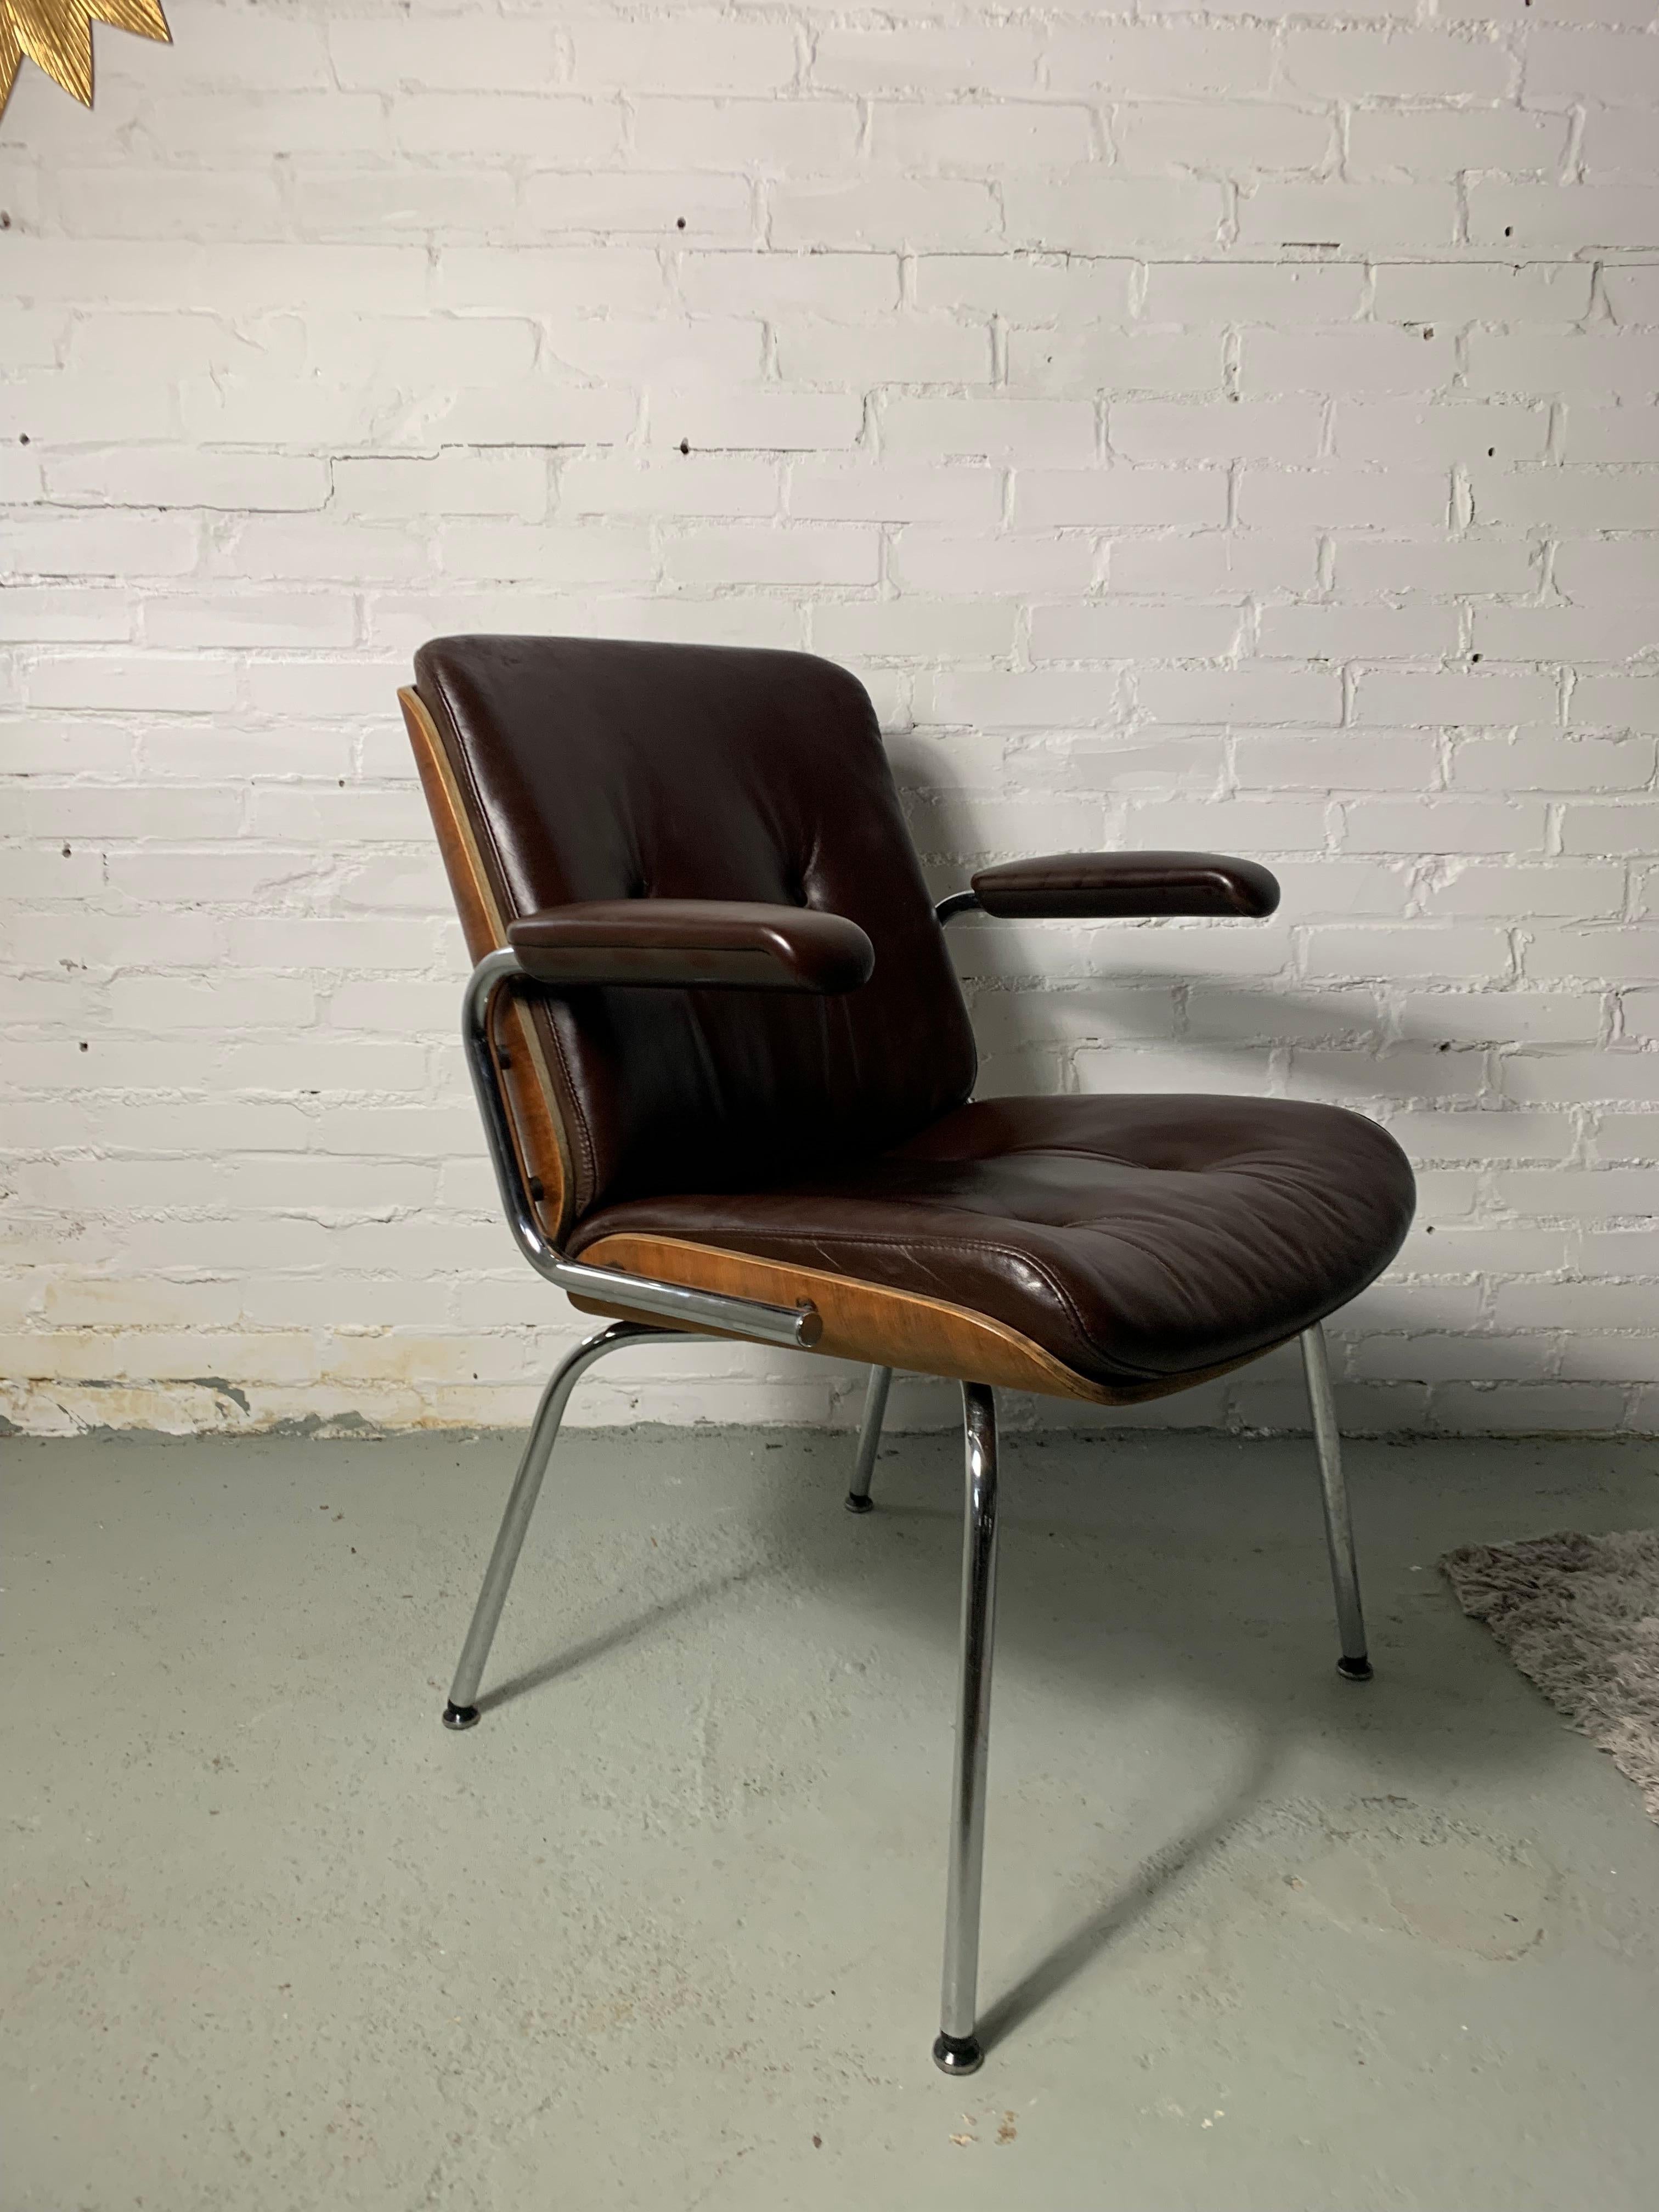 Comfortable Stoll Giroflex office chair with chocolate brown leather and a warm colored wood shell on the outer backrest. The leather is in good condition, so is the wooden back. This office chair was designed by the German designer Karl Dittert in